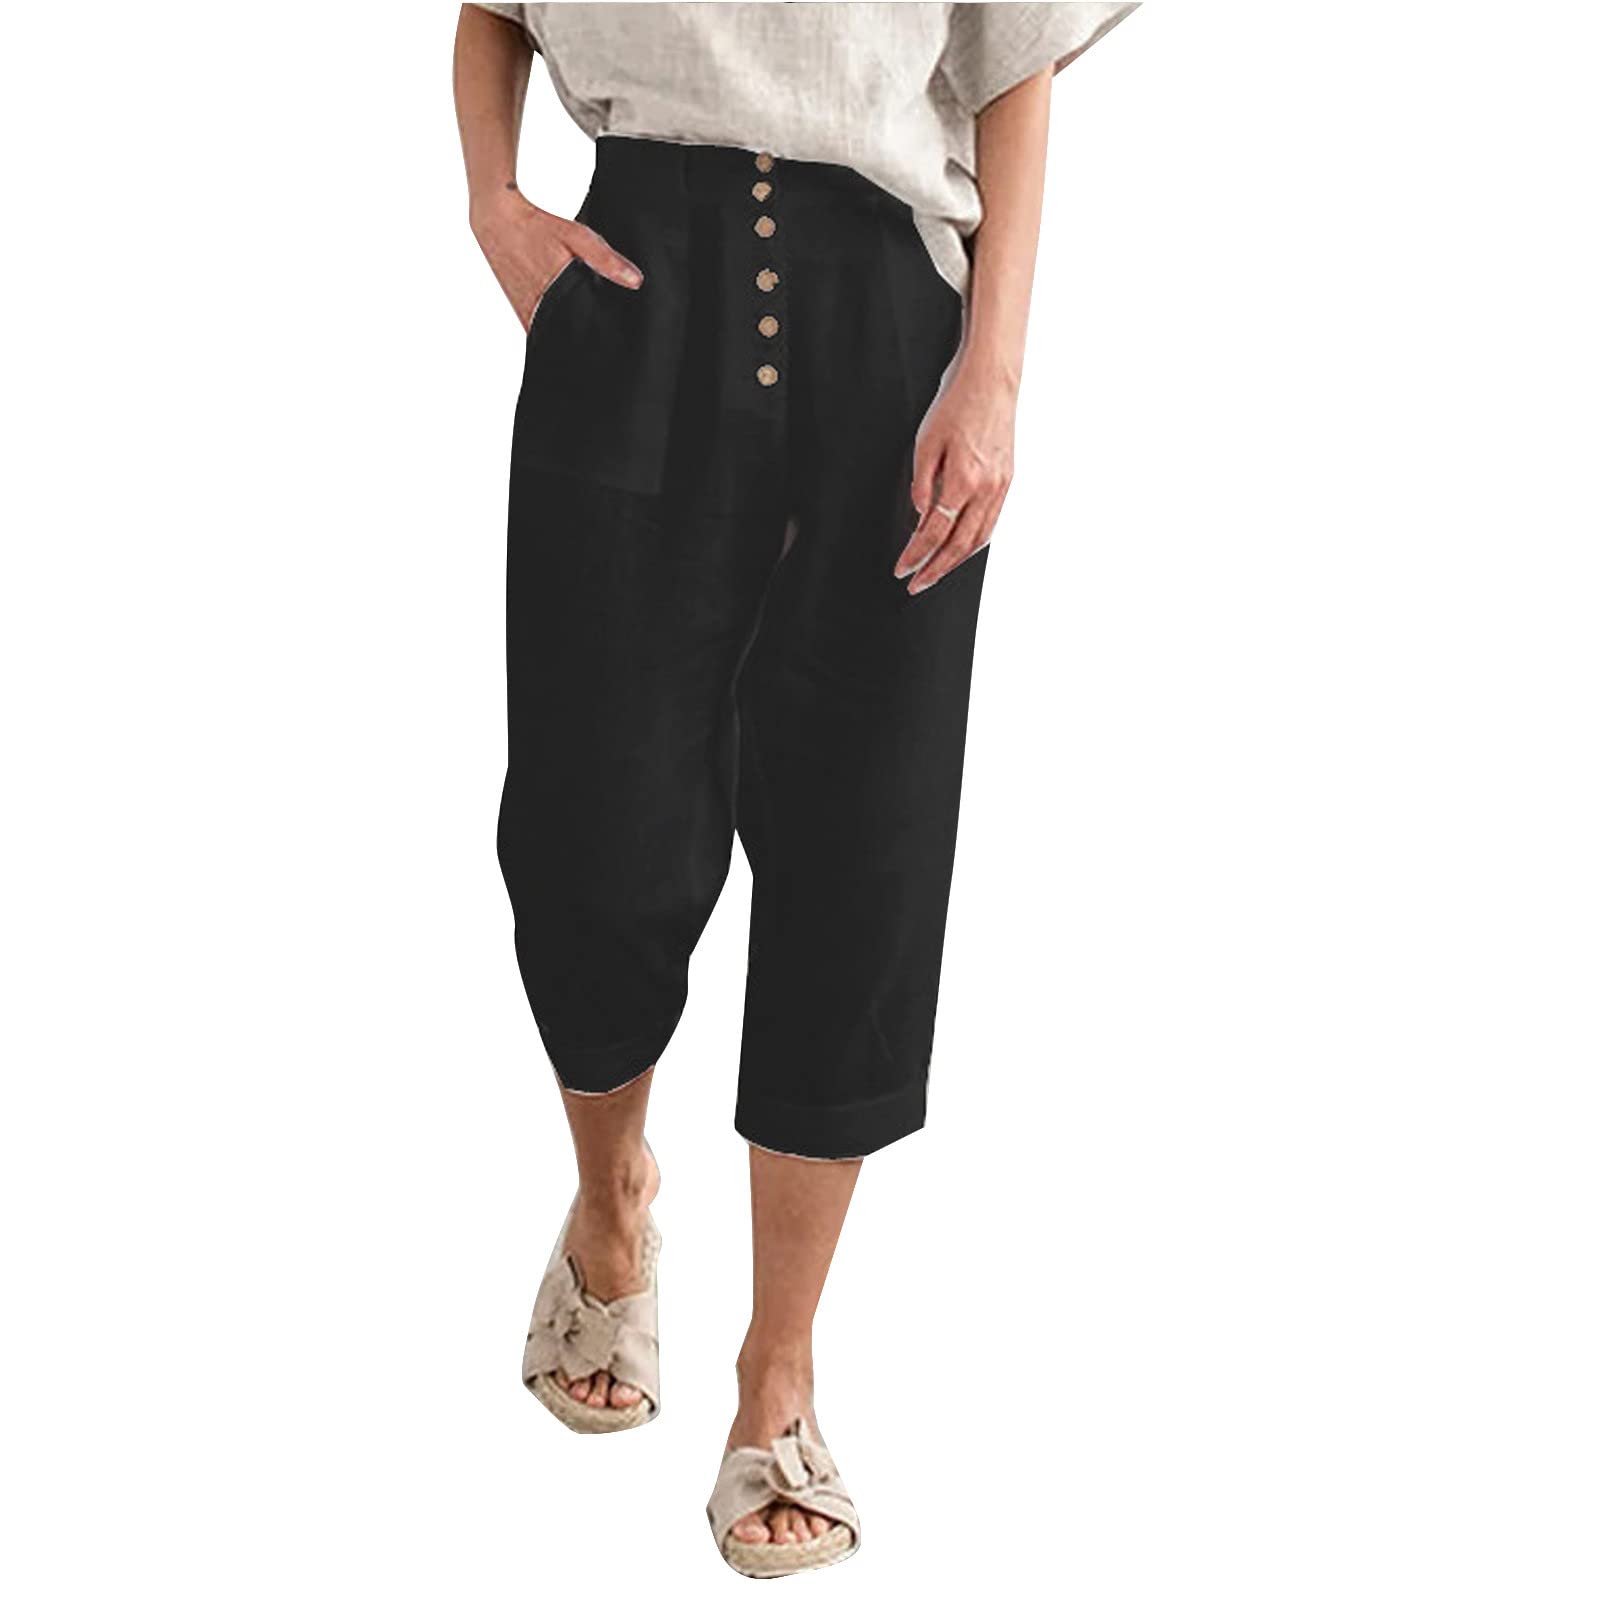 Cotton Linen Womens Capris Pants With Elastic Waist And Pockets